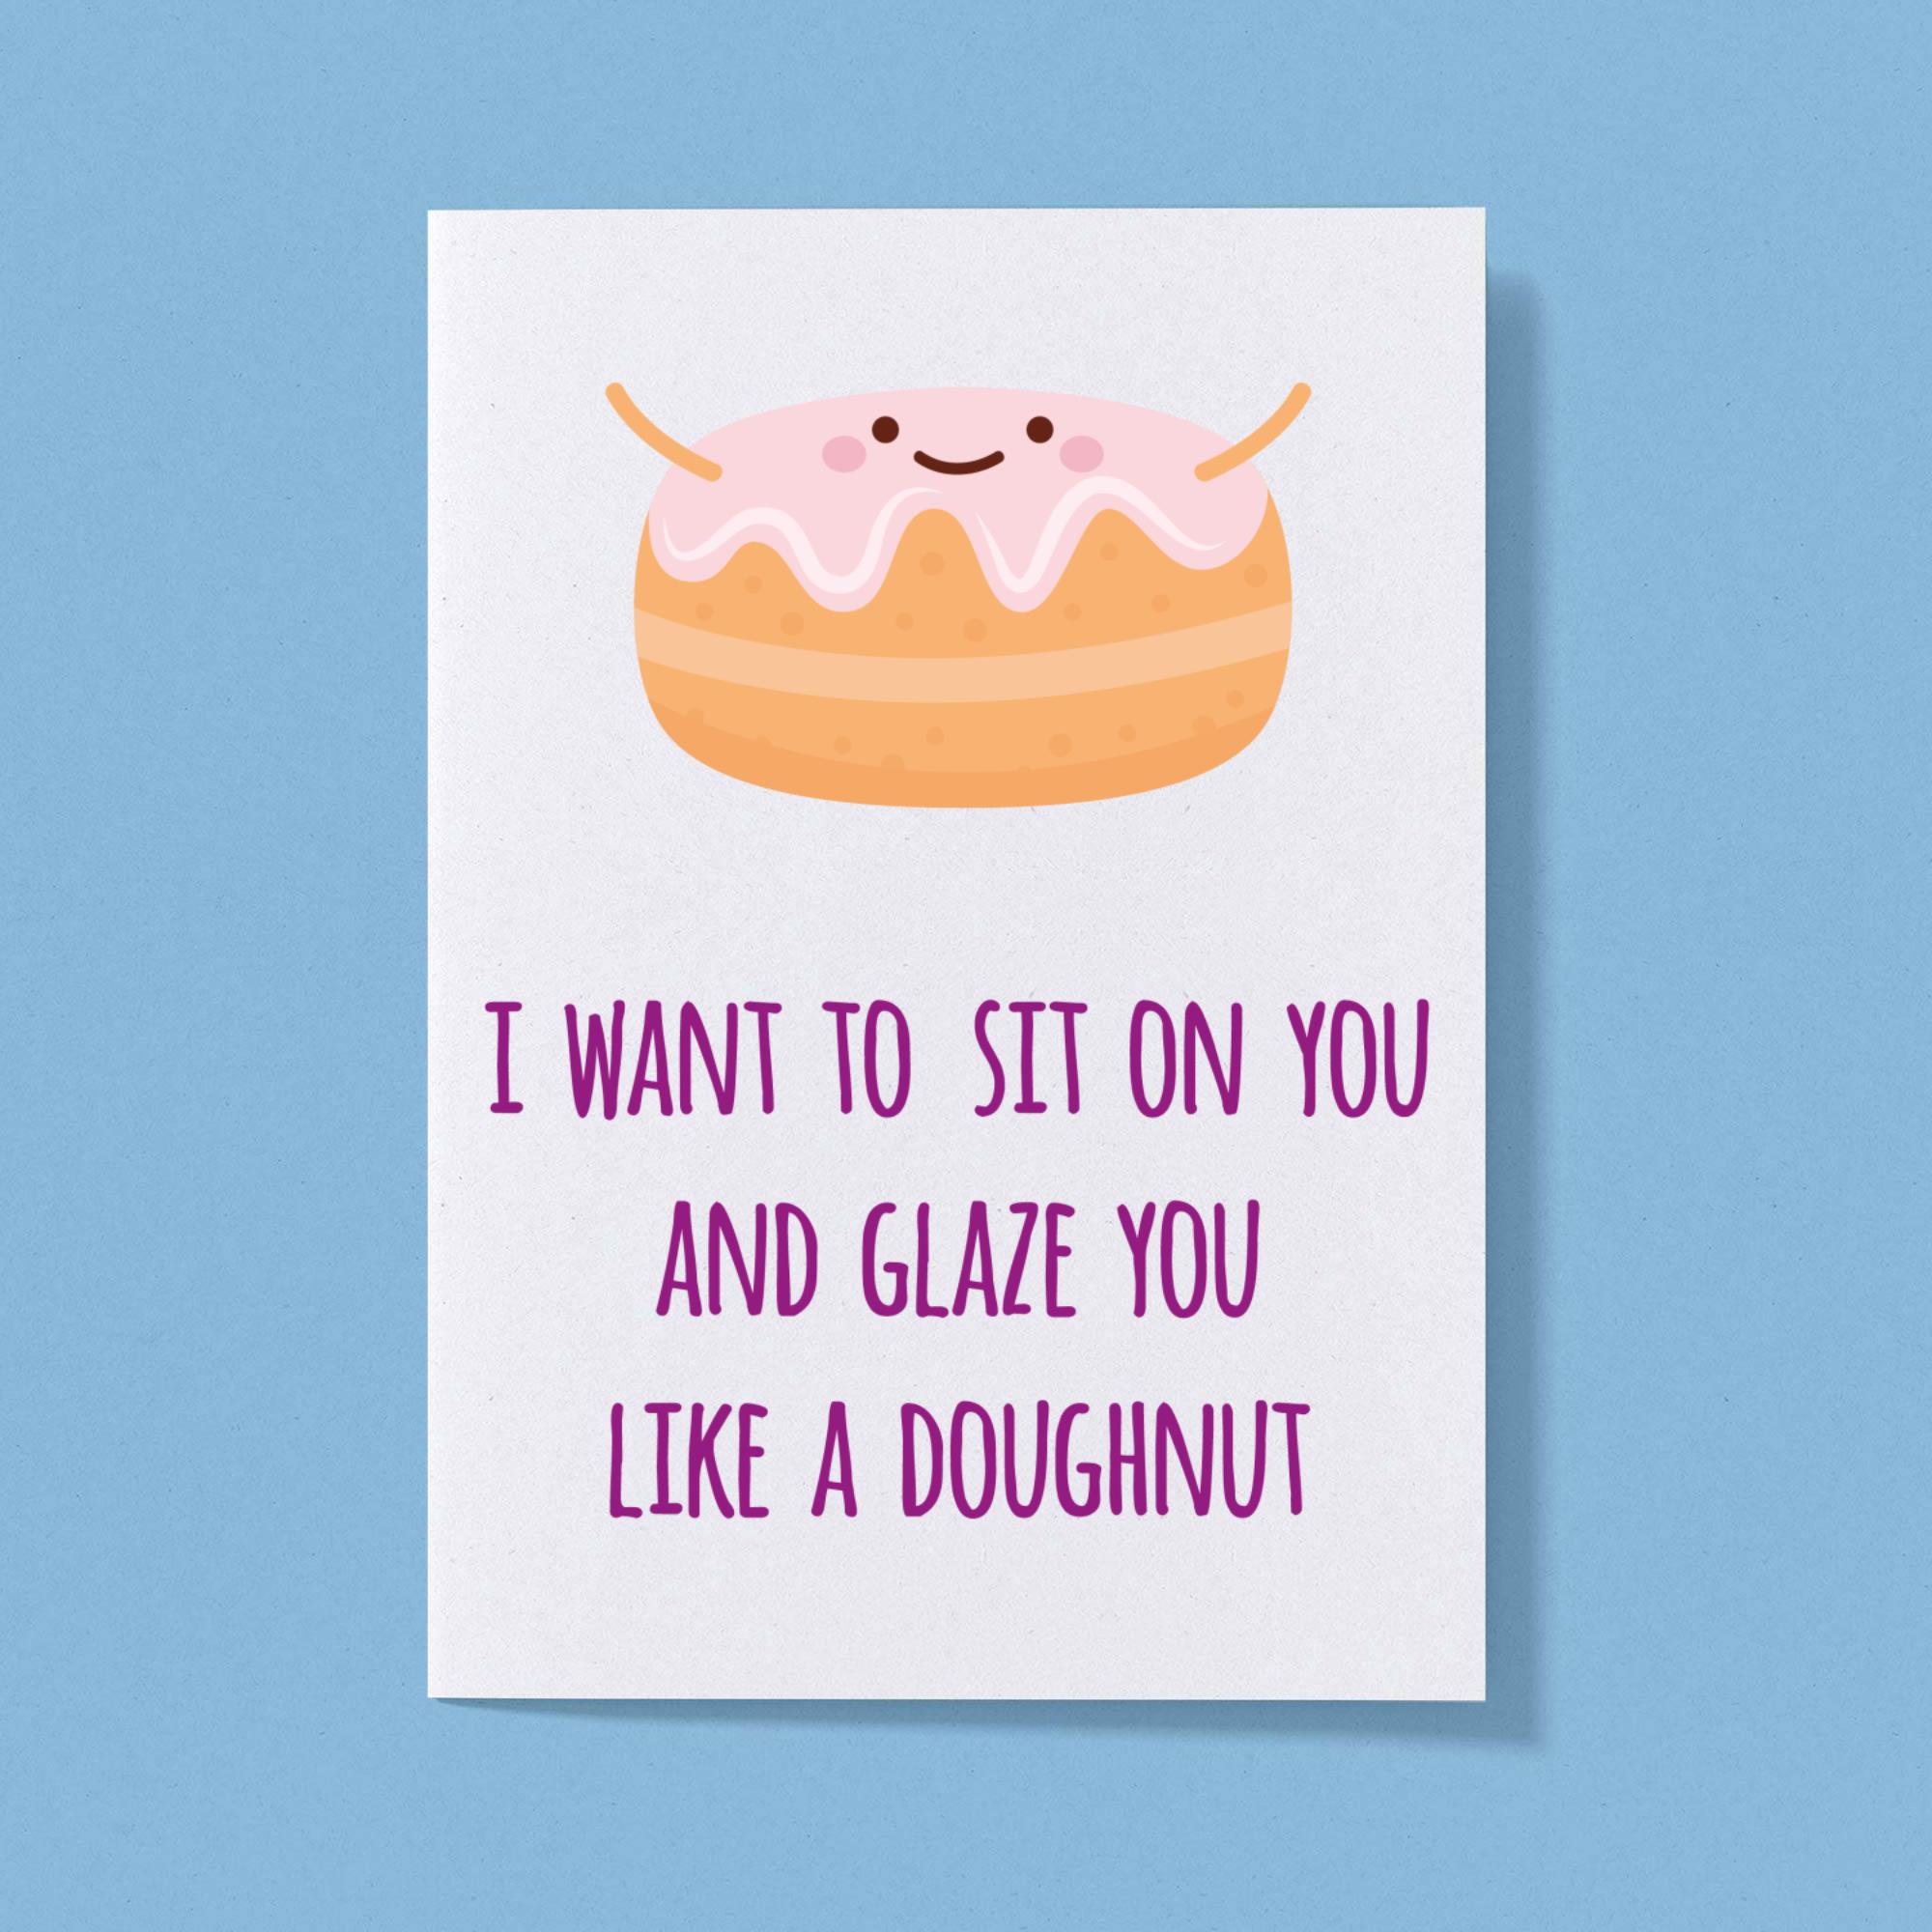 Let Me Sit On Your Face And Glaze You Like A Donut Poster for